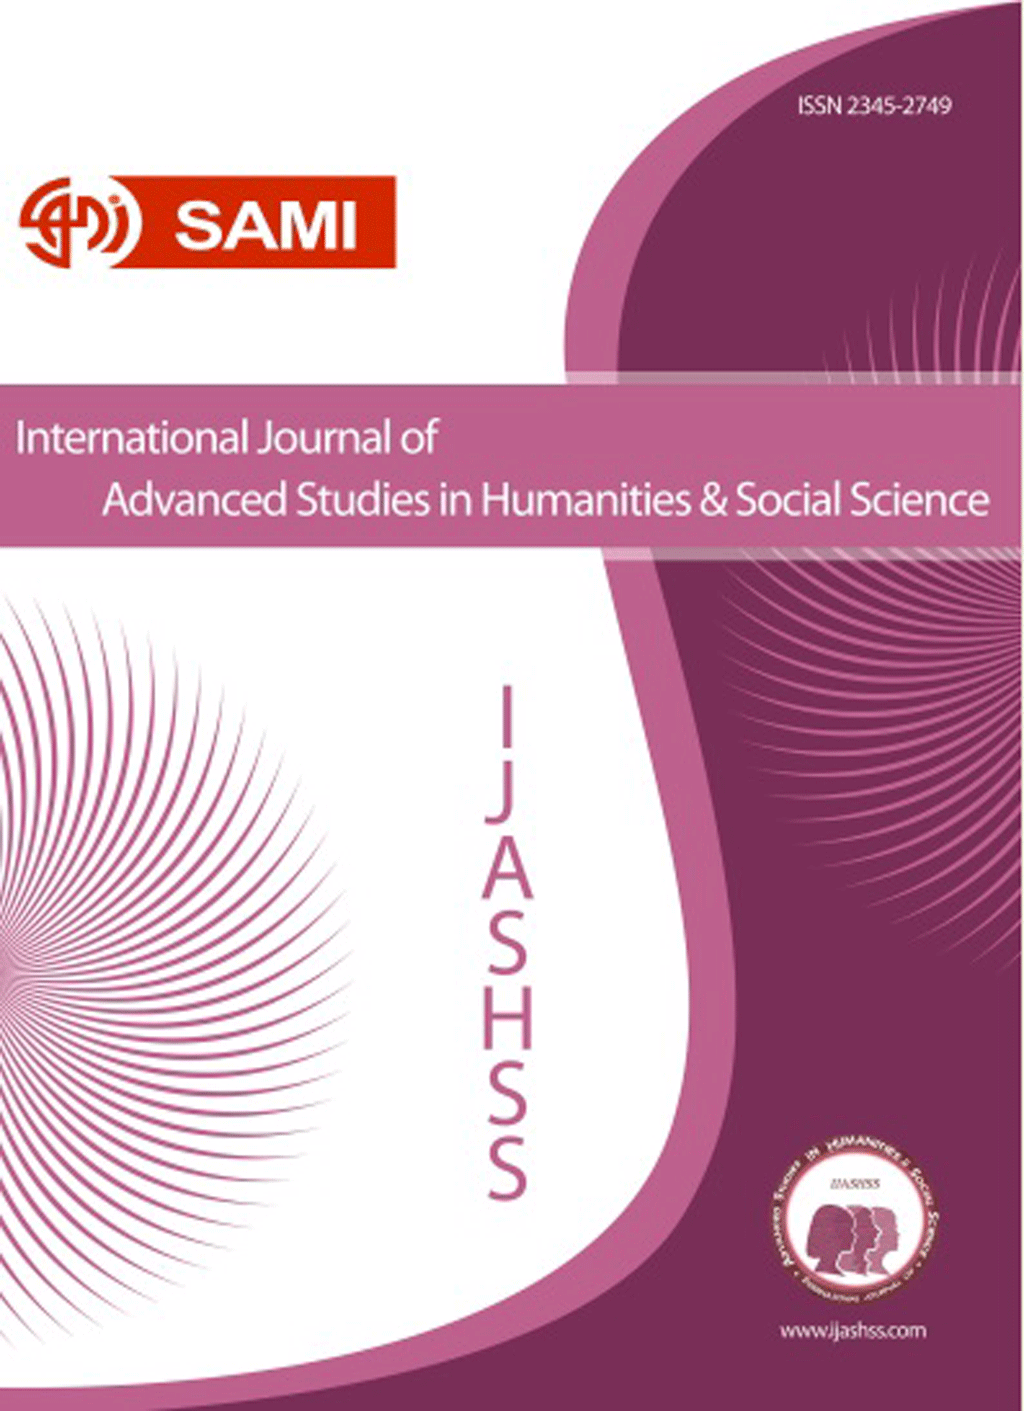 International Journal of Advanced Studies in Humanities and Social Science - July 2016, Volume 5 - Issue 3